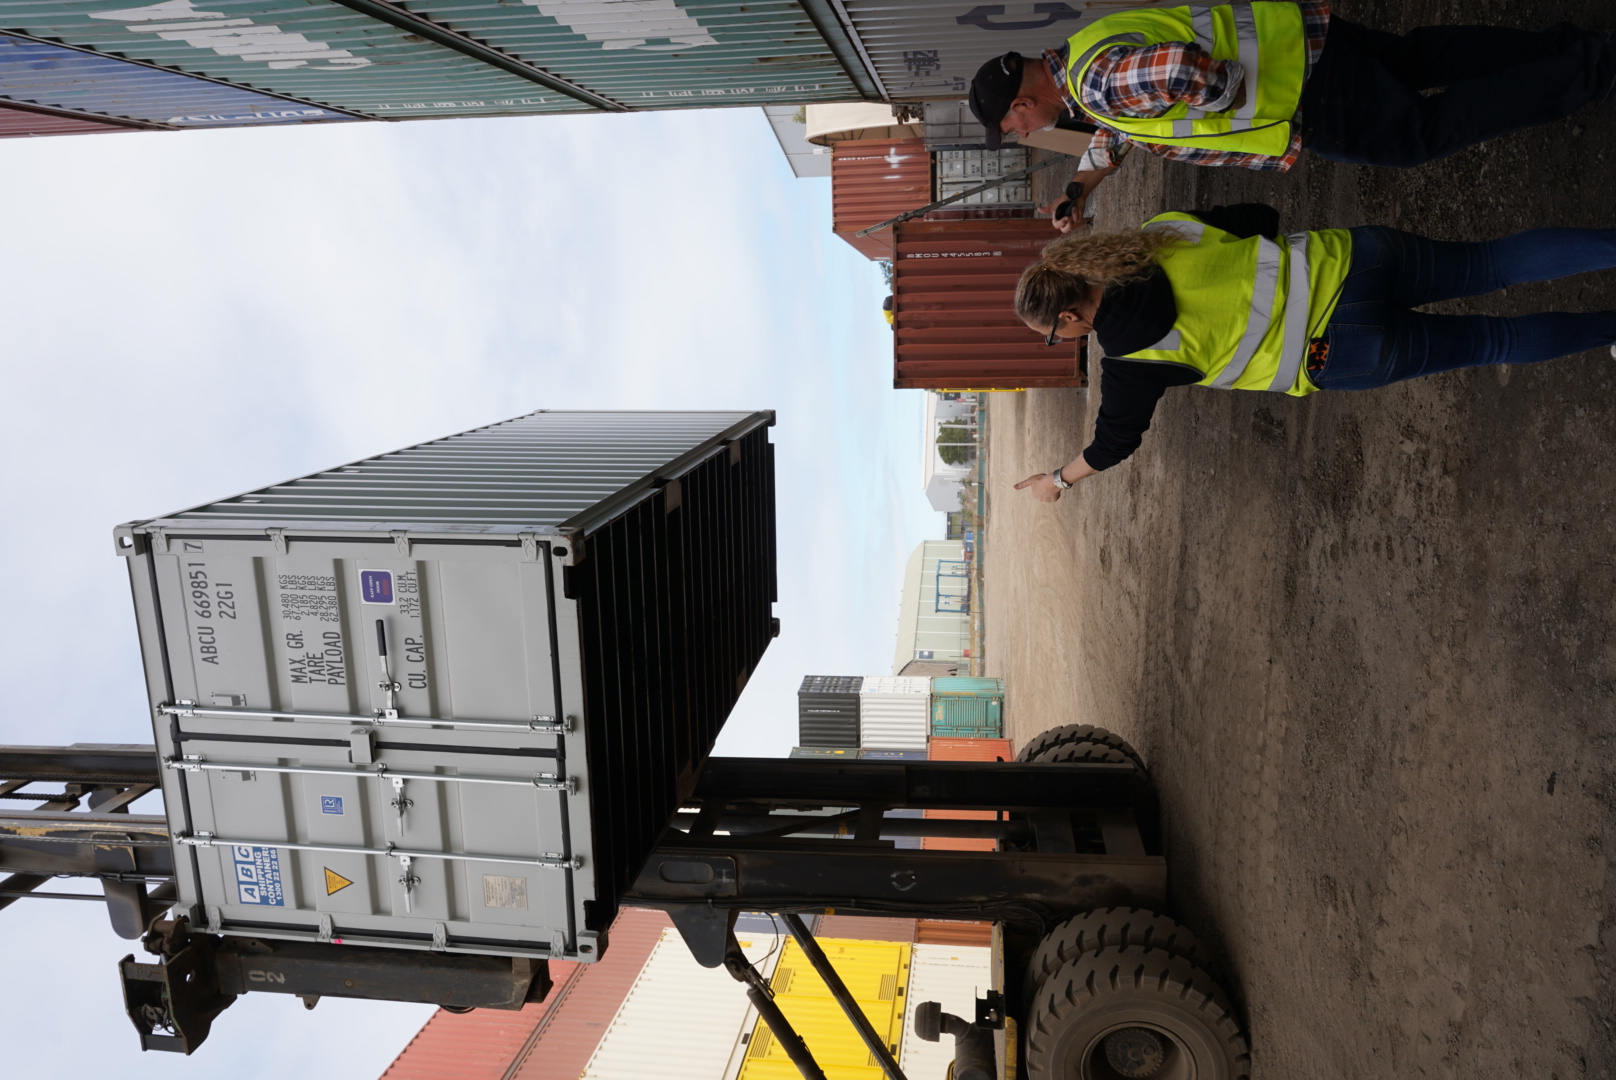 Two people inspecting a container together